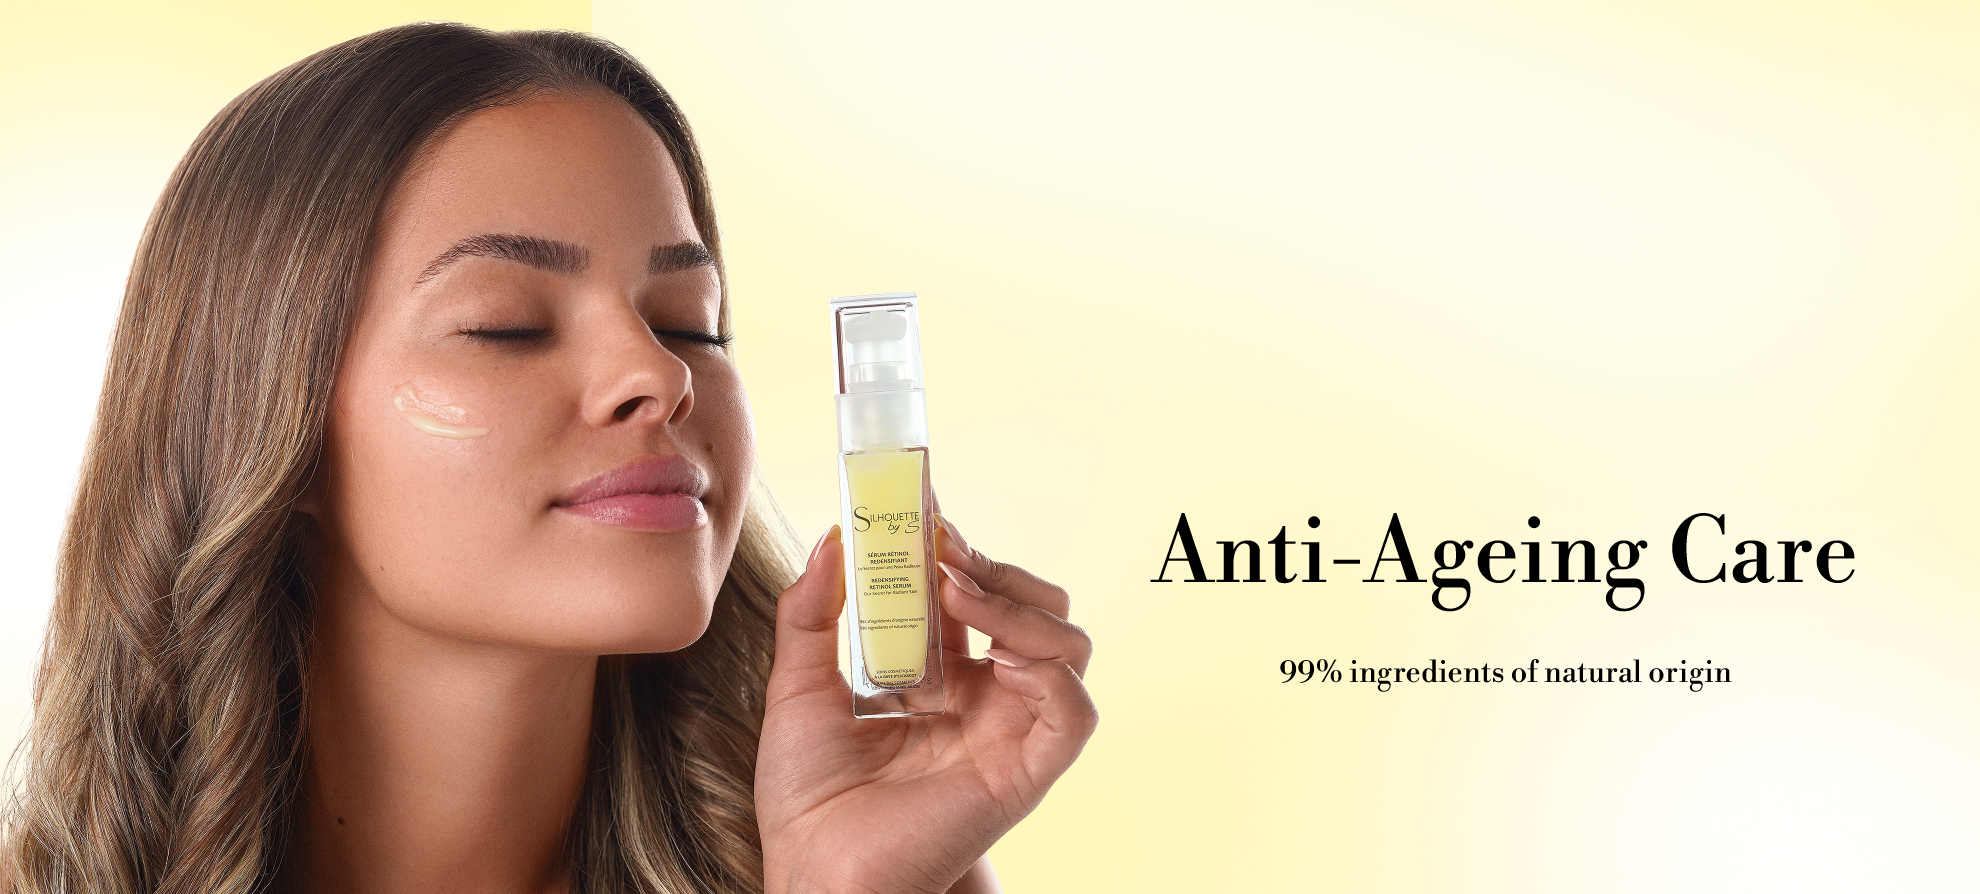 Anti-Ageing Care